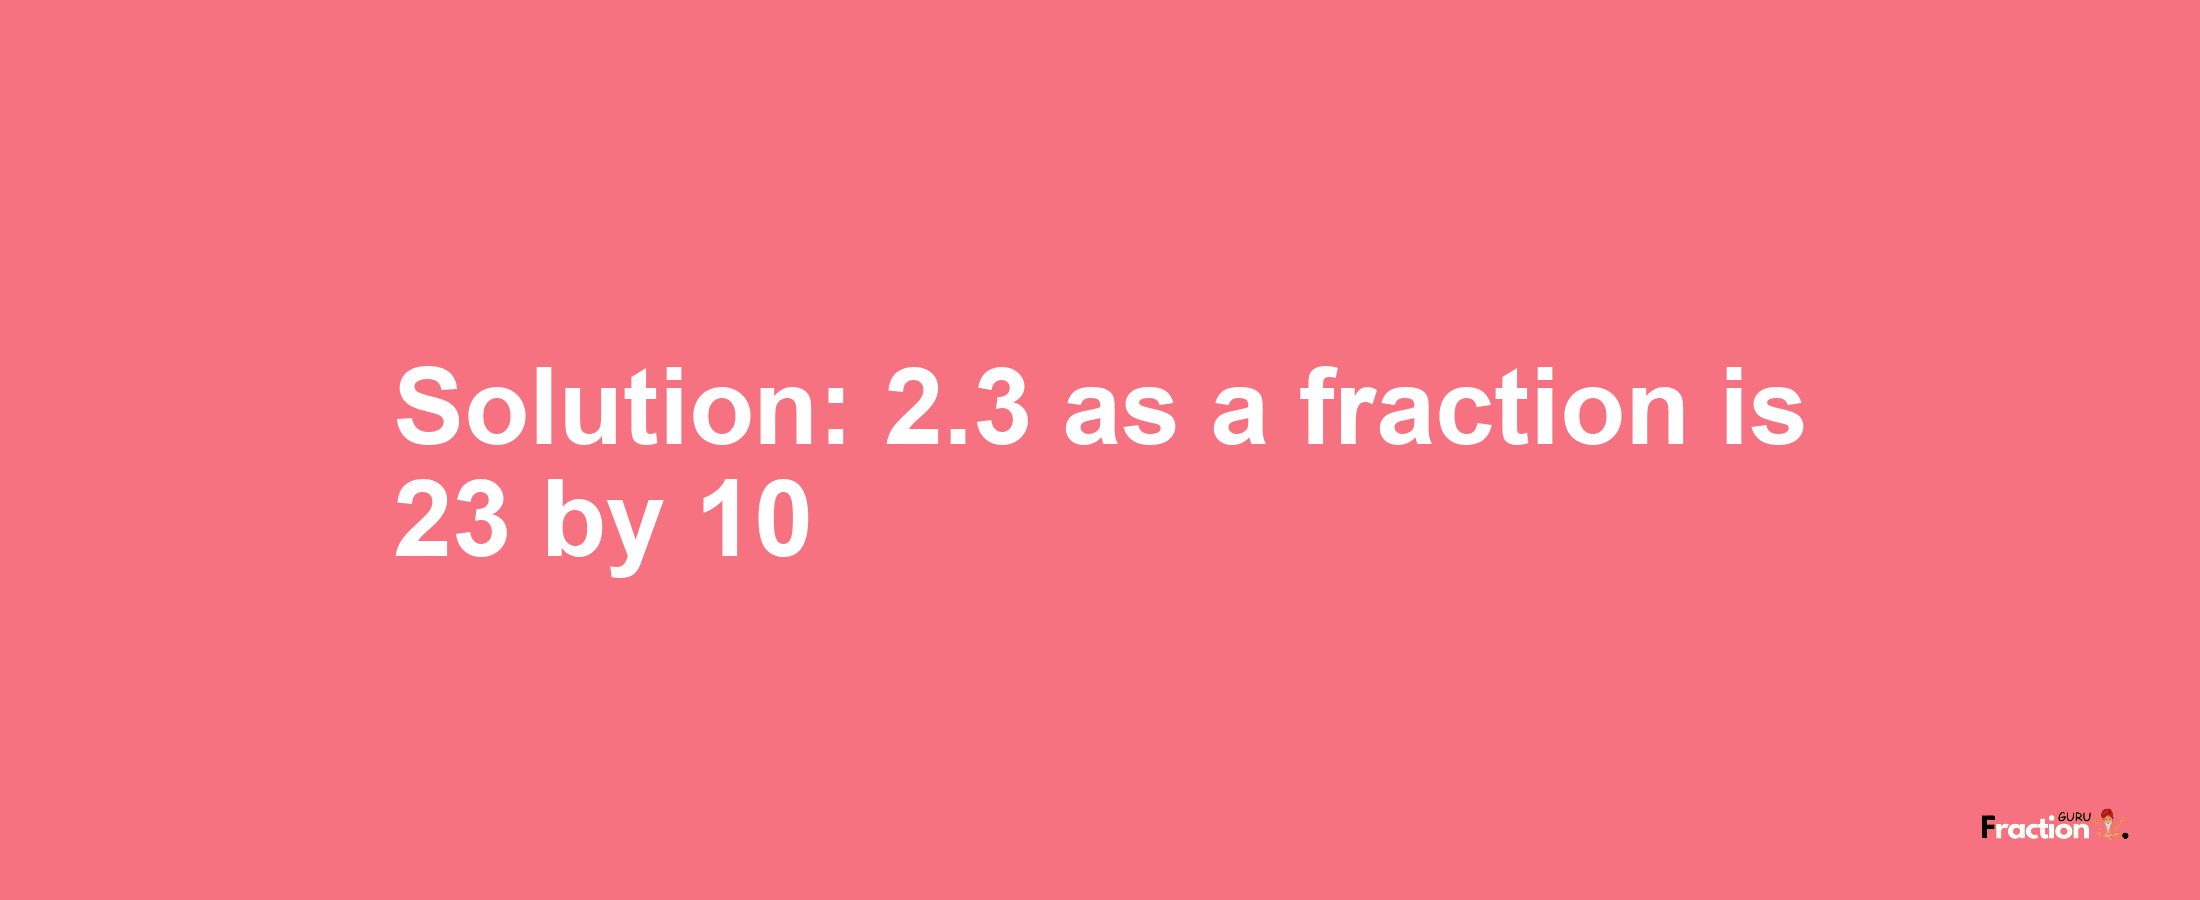 Solution:2.3 as a fraction is 23/10